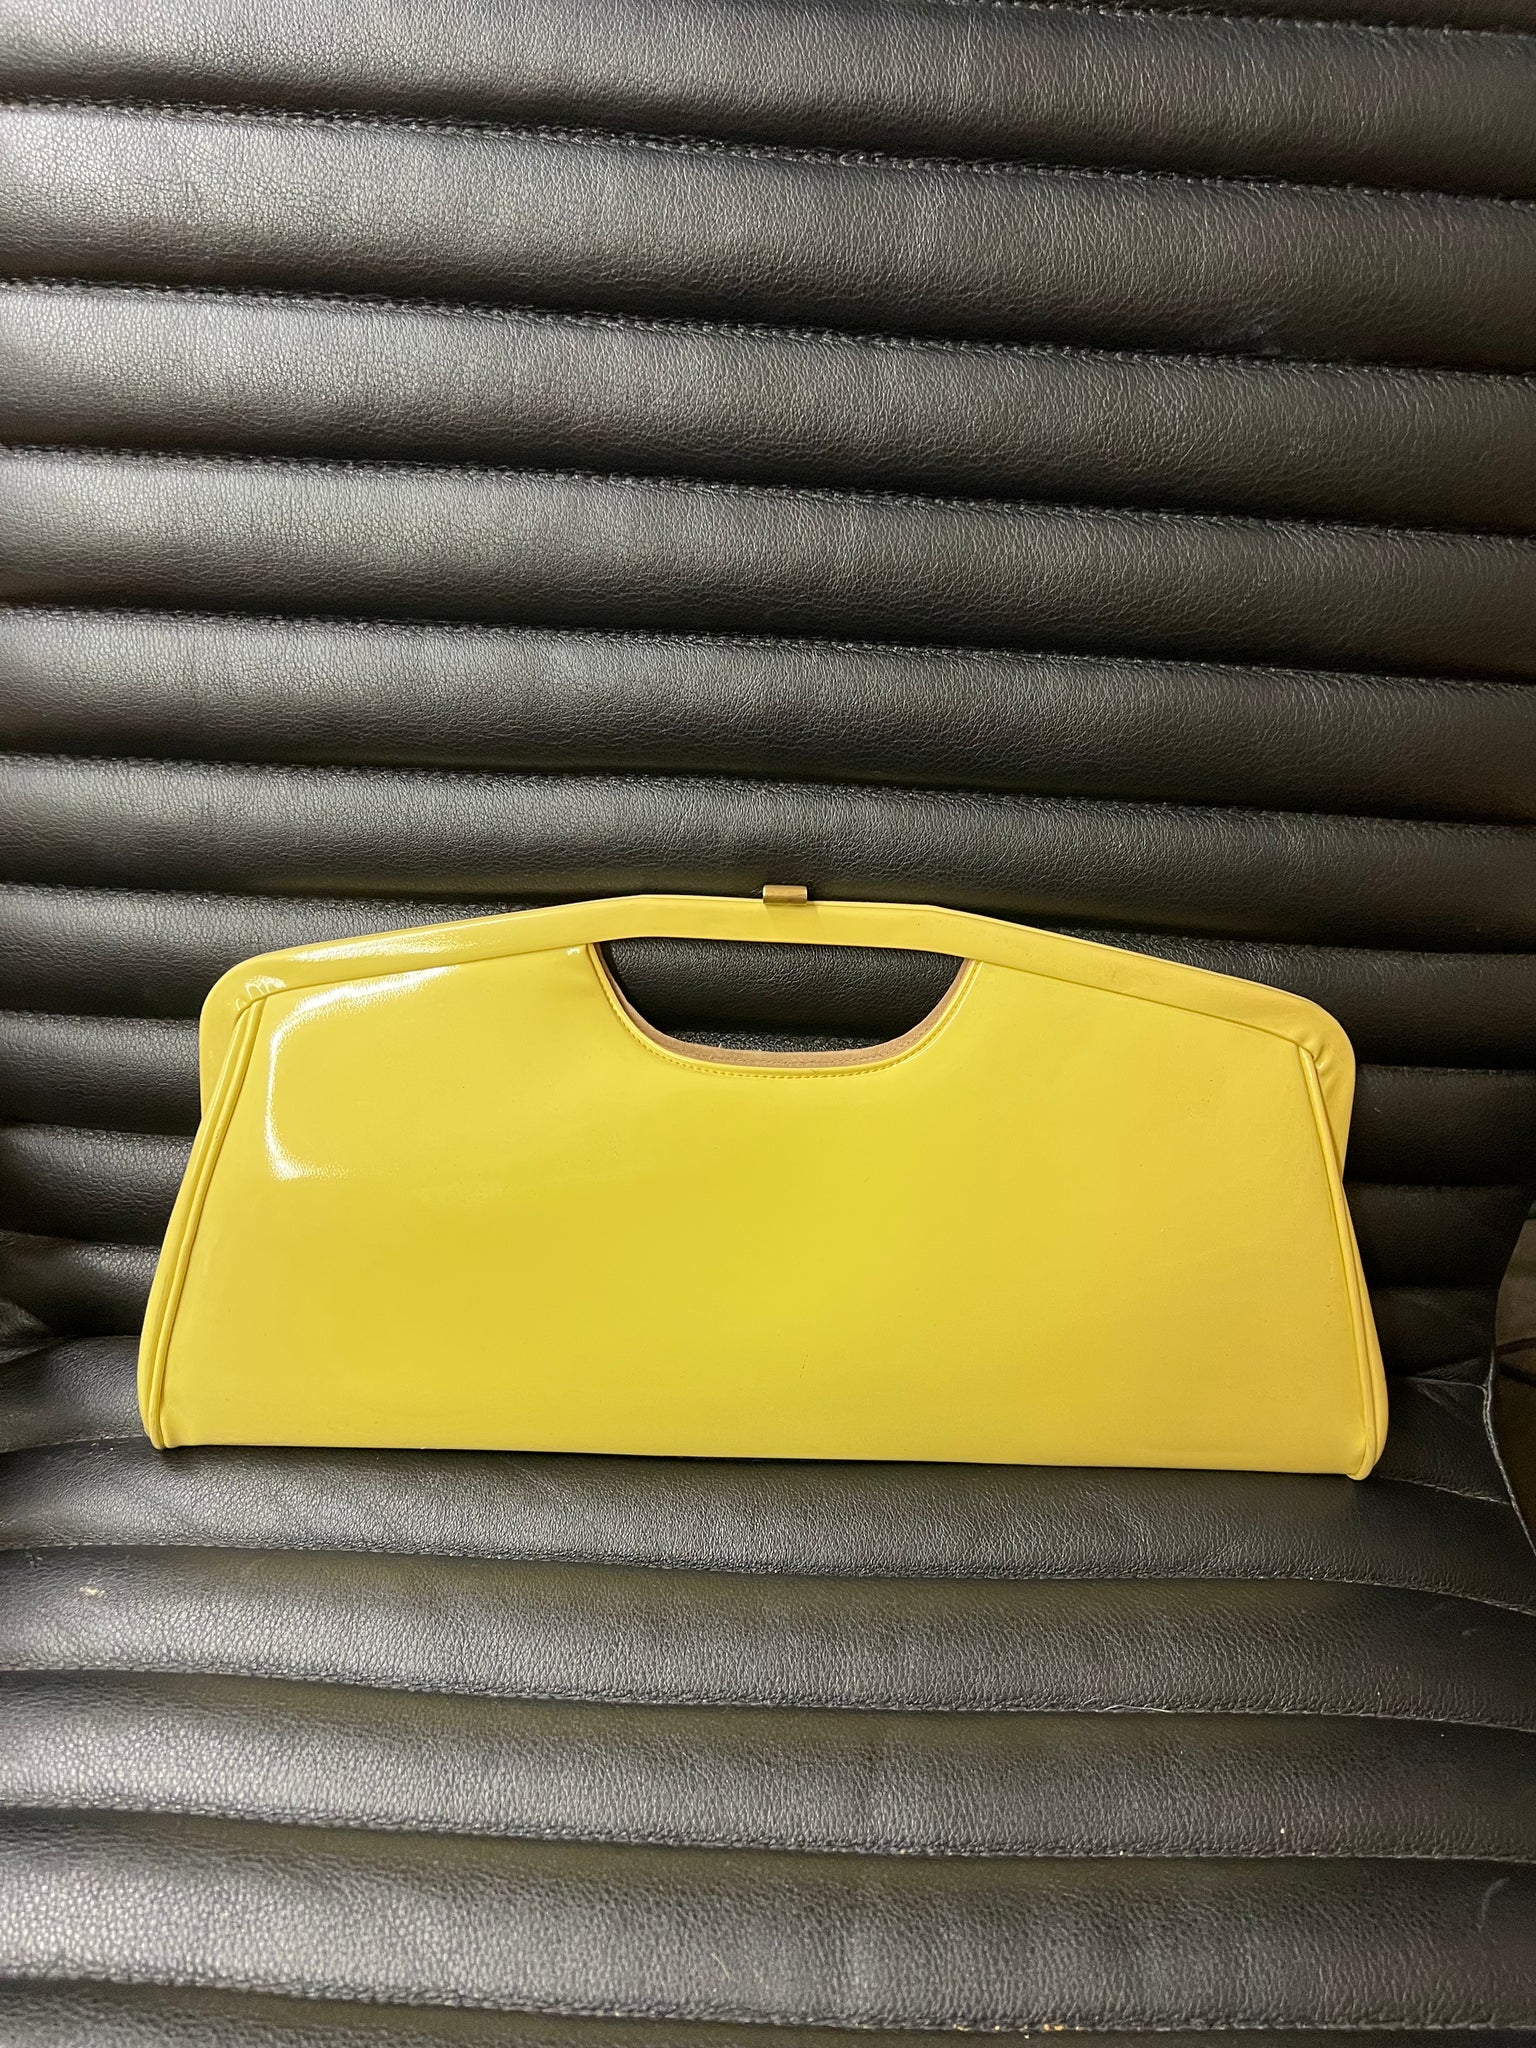 1960s ACCESSORIES-PURSE-yellow large clutch